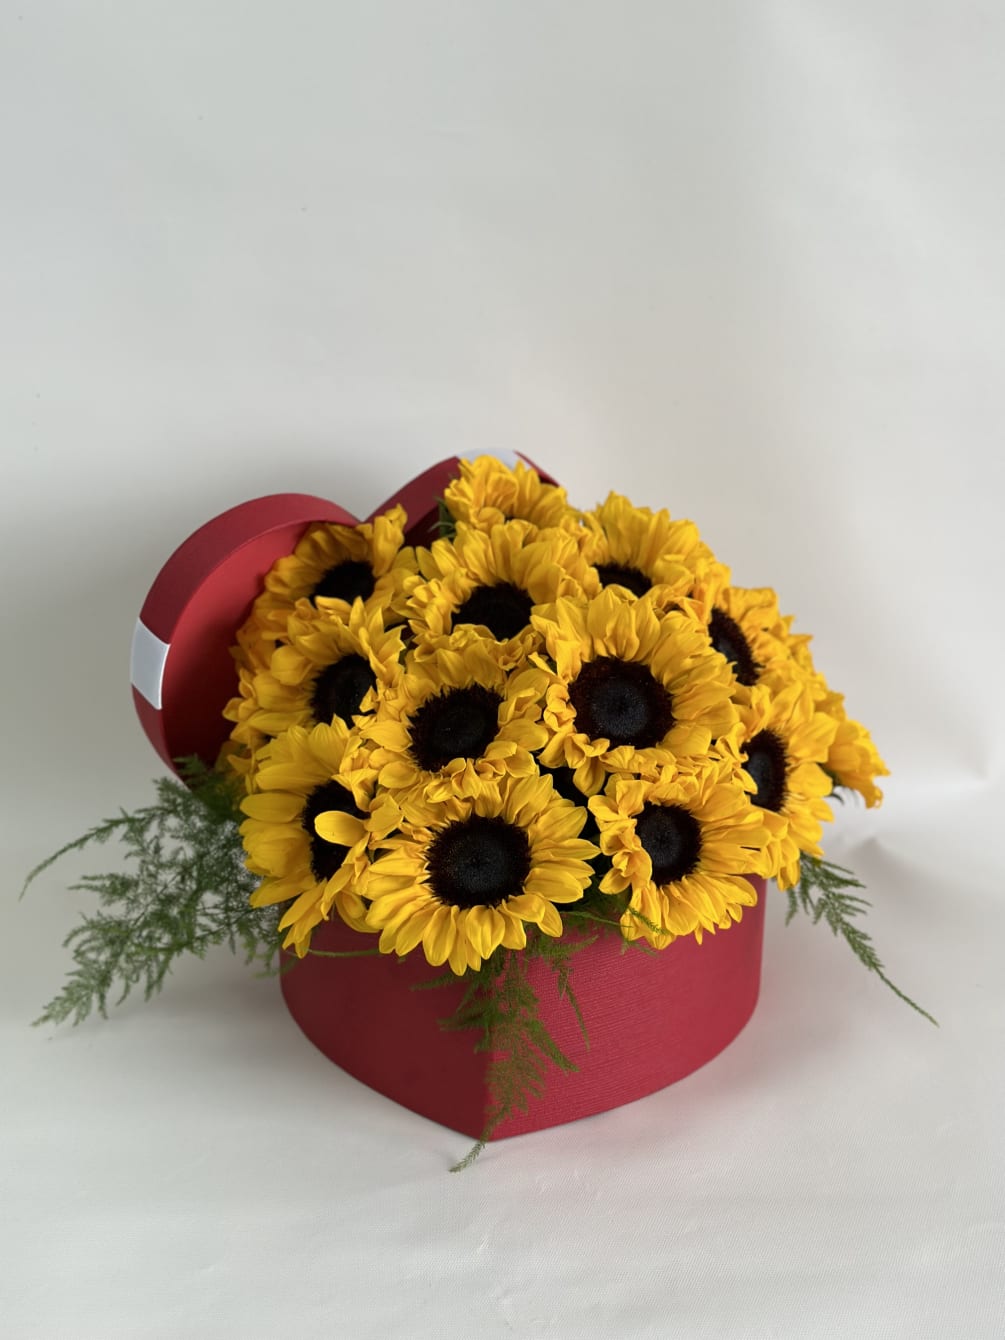 Heart box with lots of sunflowers!! perfect for any occasion!! Everyone loves